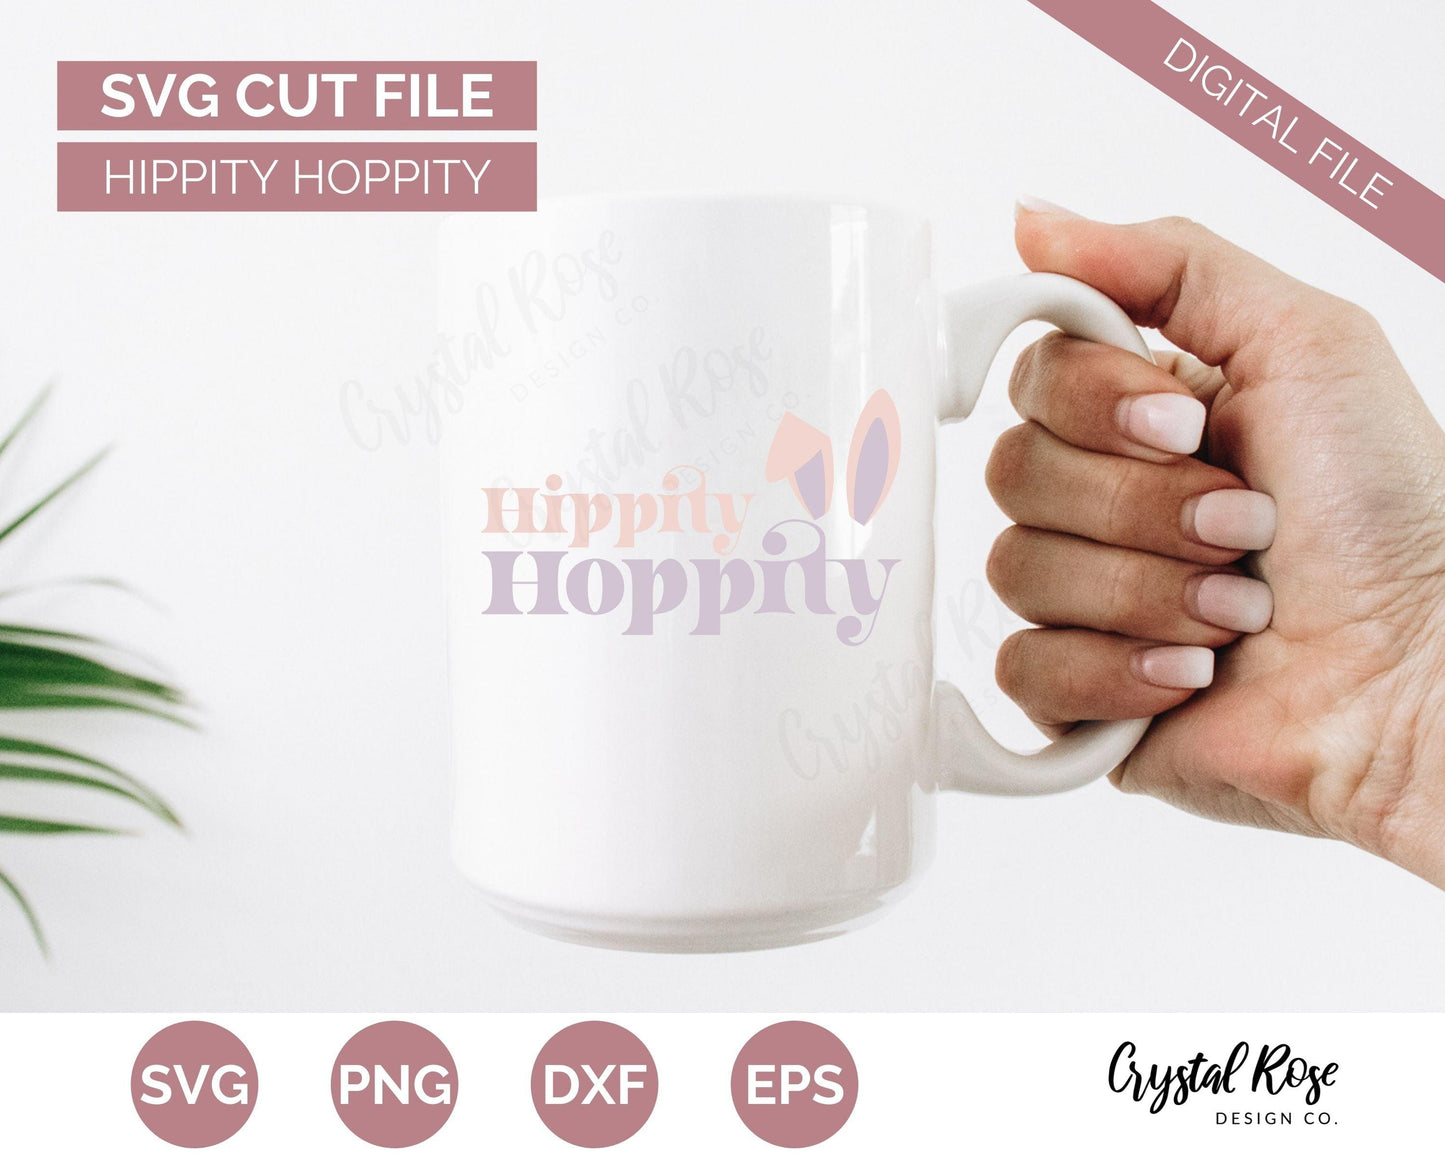 Hippity Hoppity SVG, Easter SVG, Digital Download, Cricut, Silhouette, Glowforge (includes svg/png/dxf/eps)